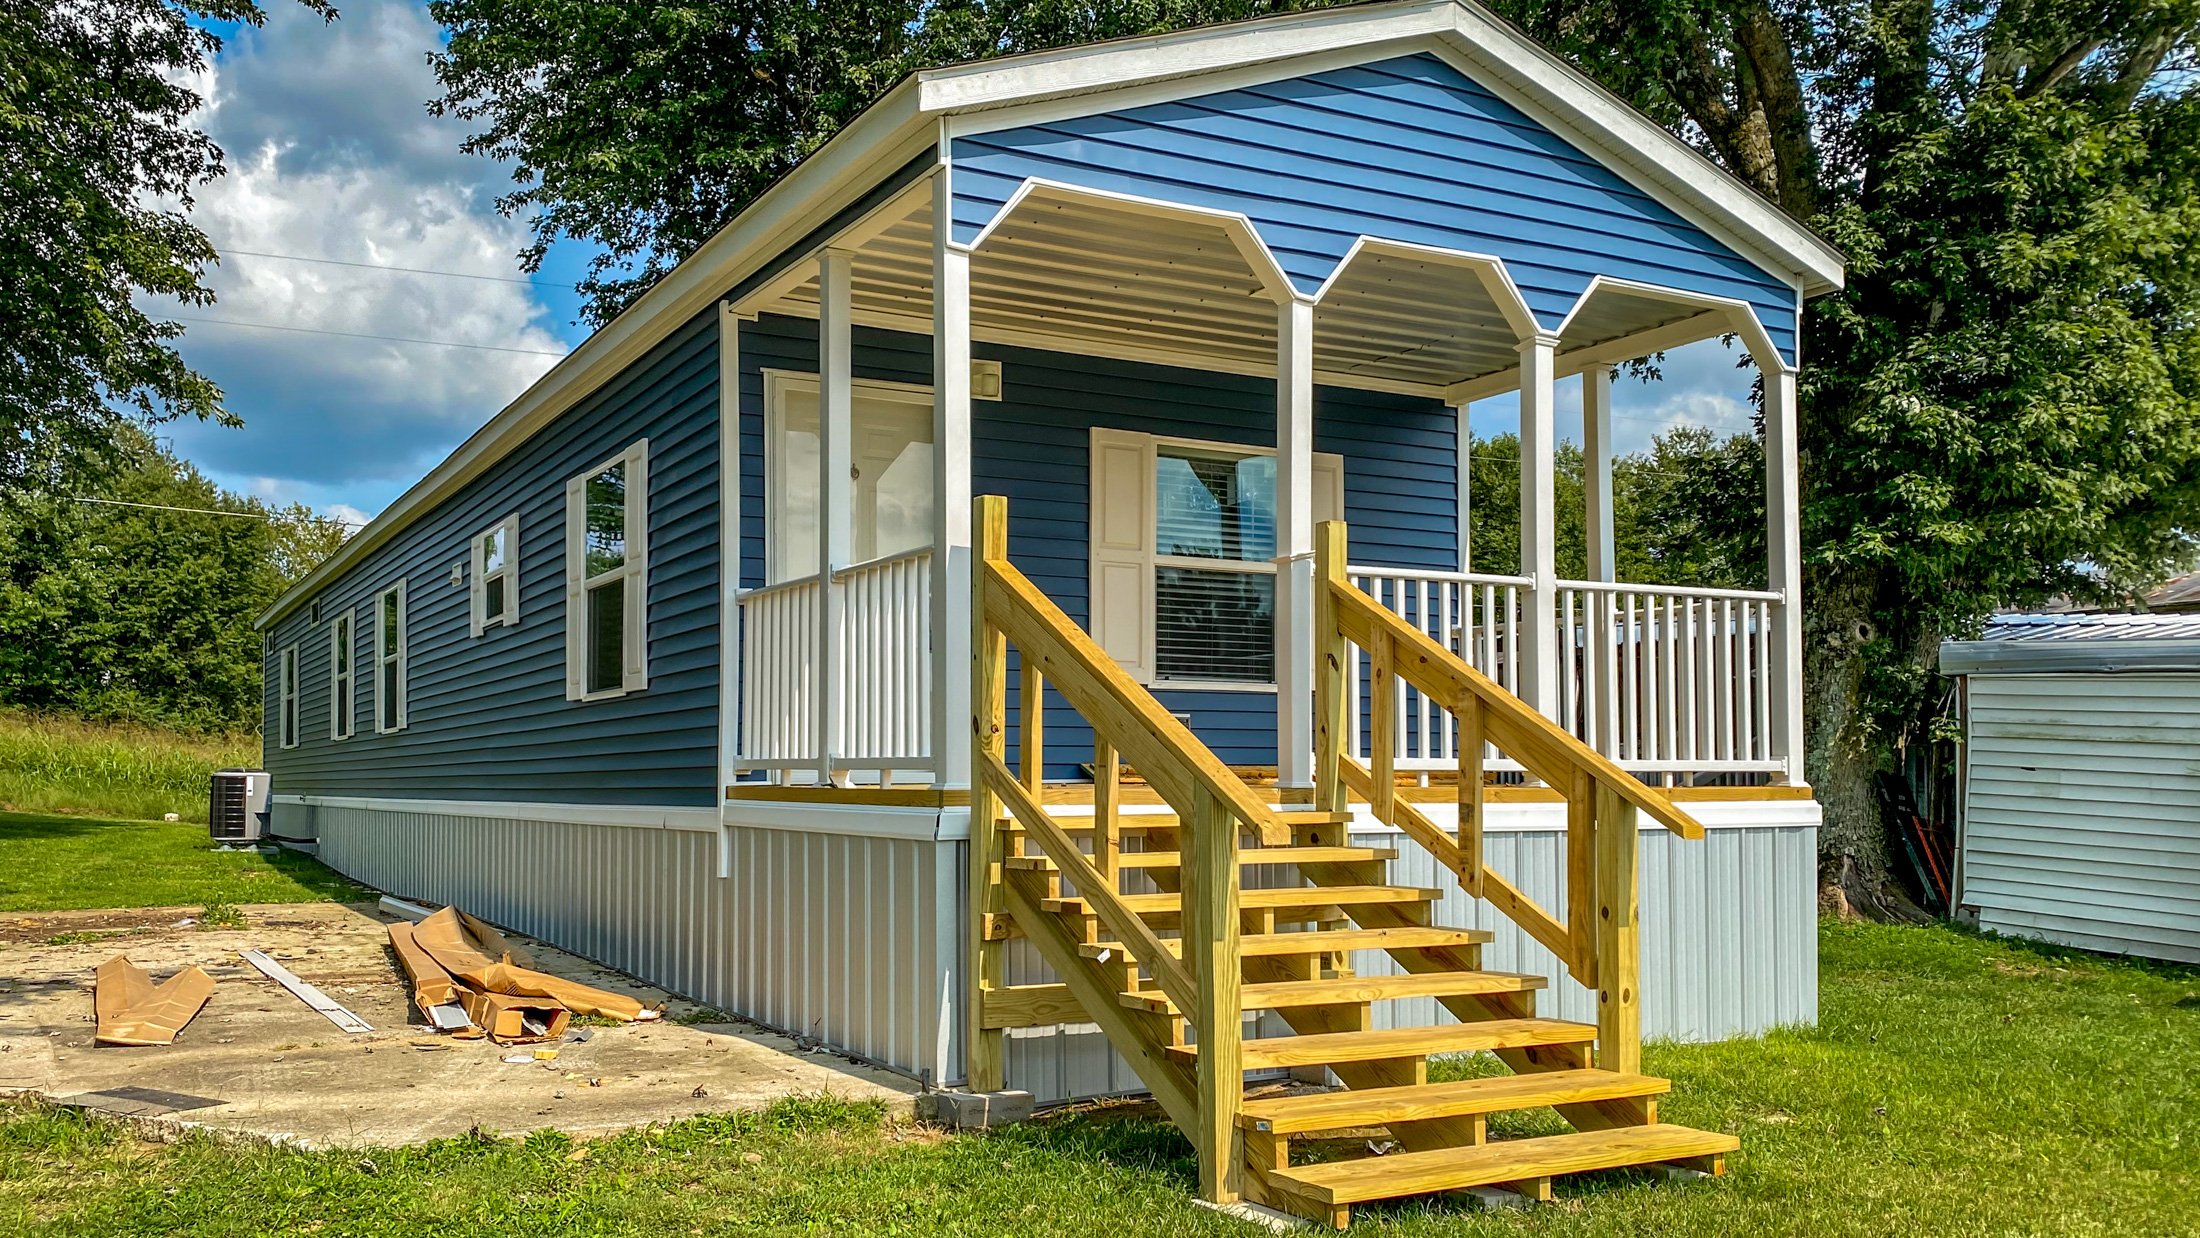 Single wide mobile home for sale - a home you can afford long term